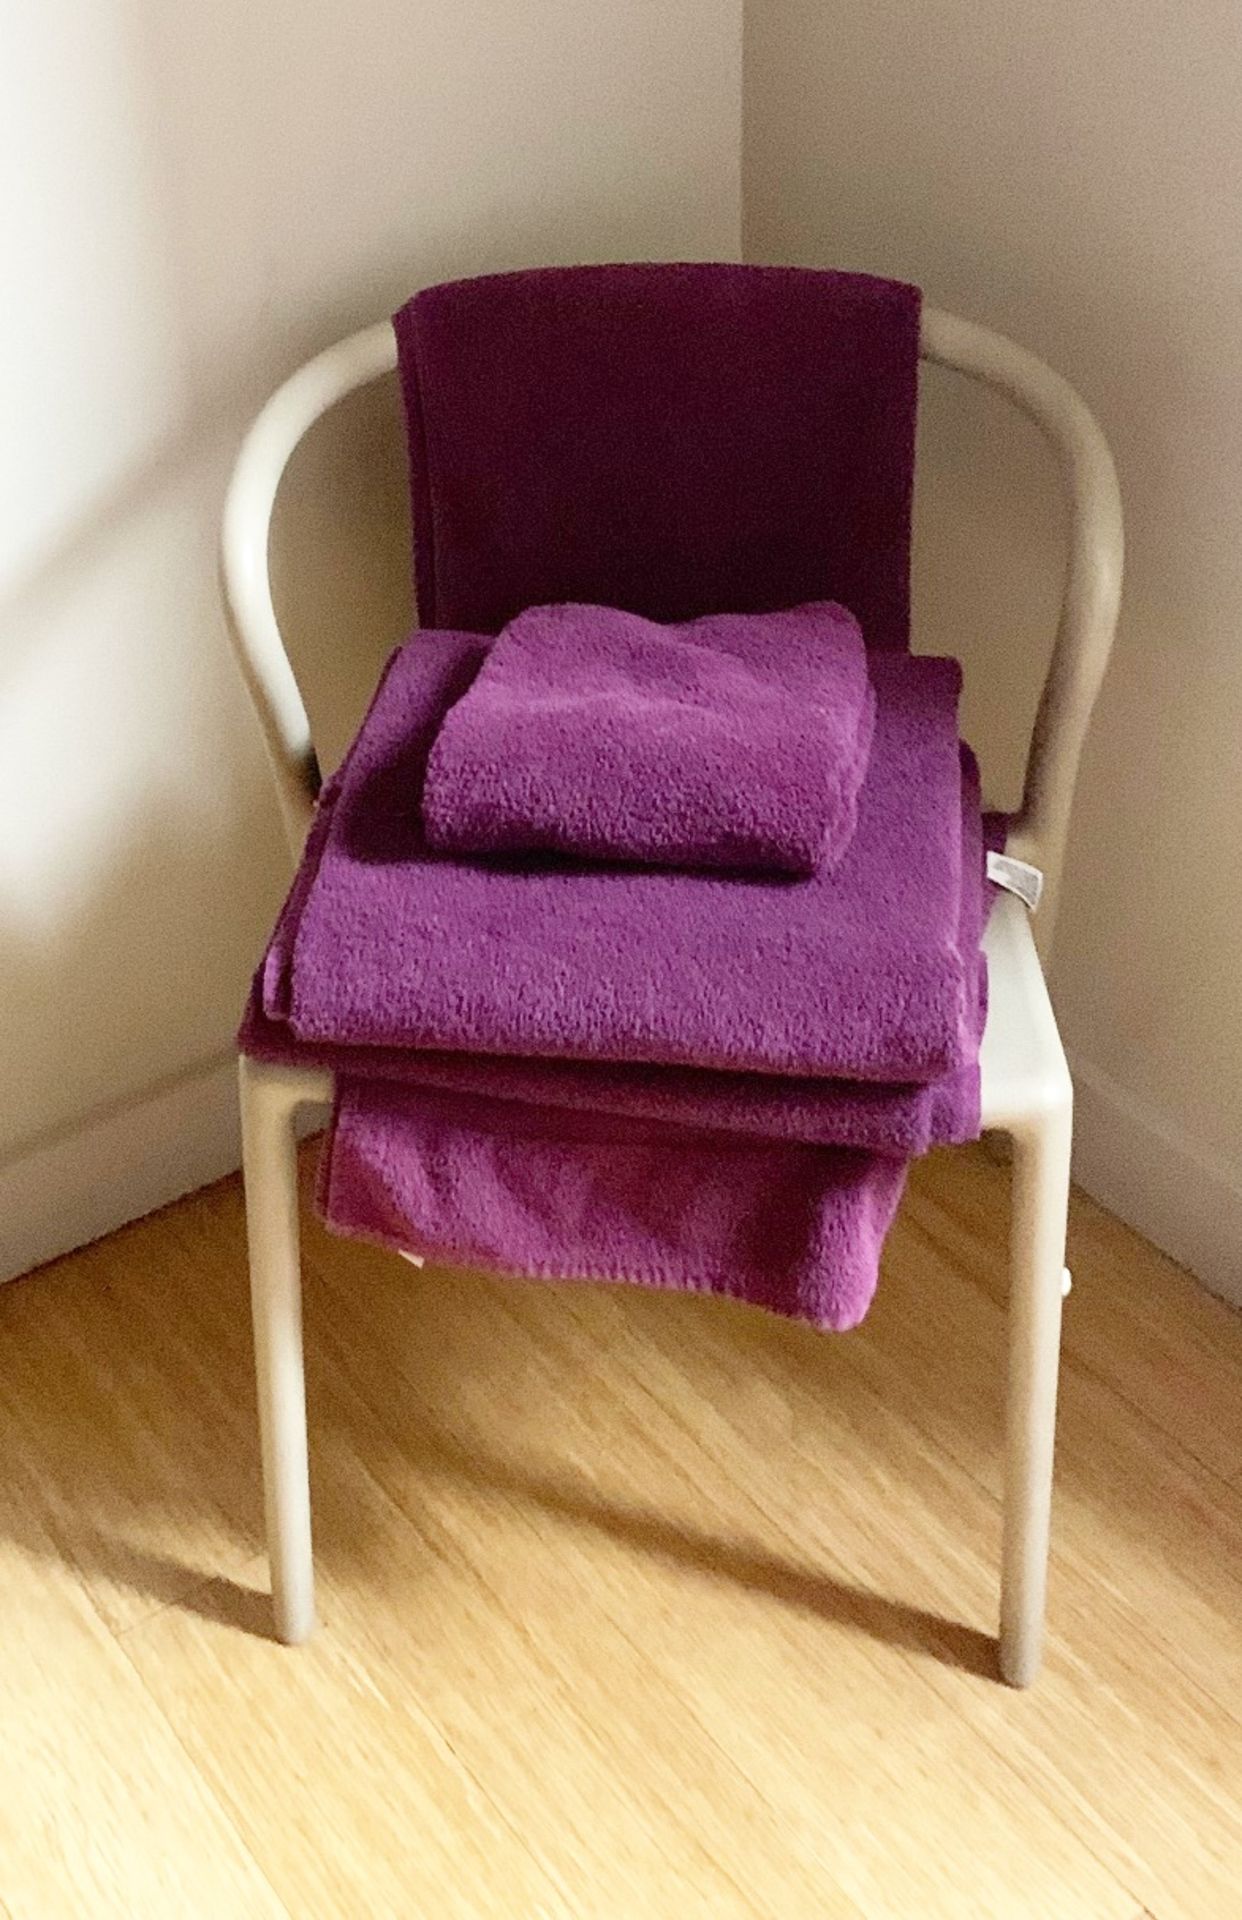 40 x Majestic Luxury 620gsm Bath Towels in Purple - Size SMALL - RRP £240 - CL587 - Location: Altrin - Image 4 of 4